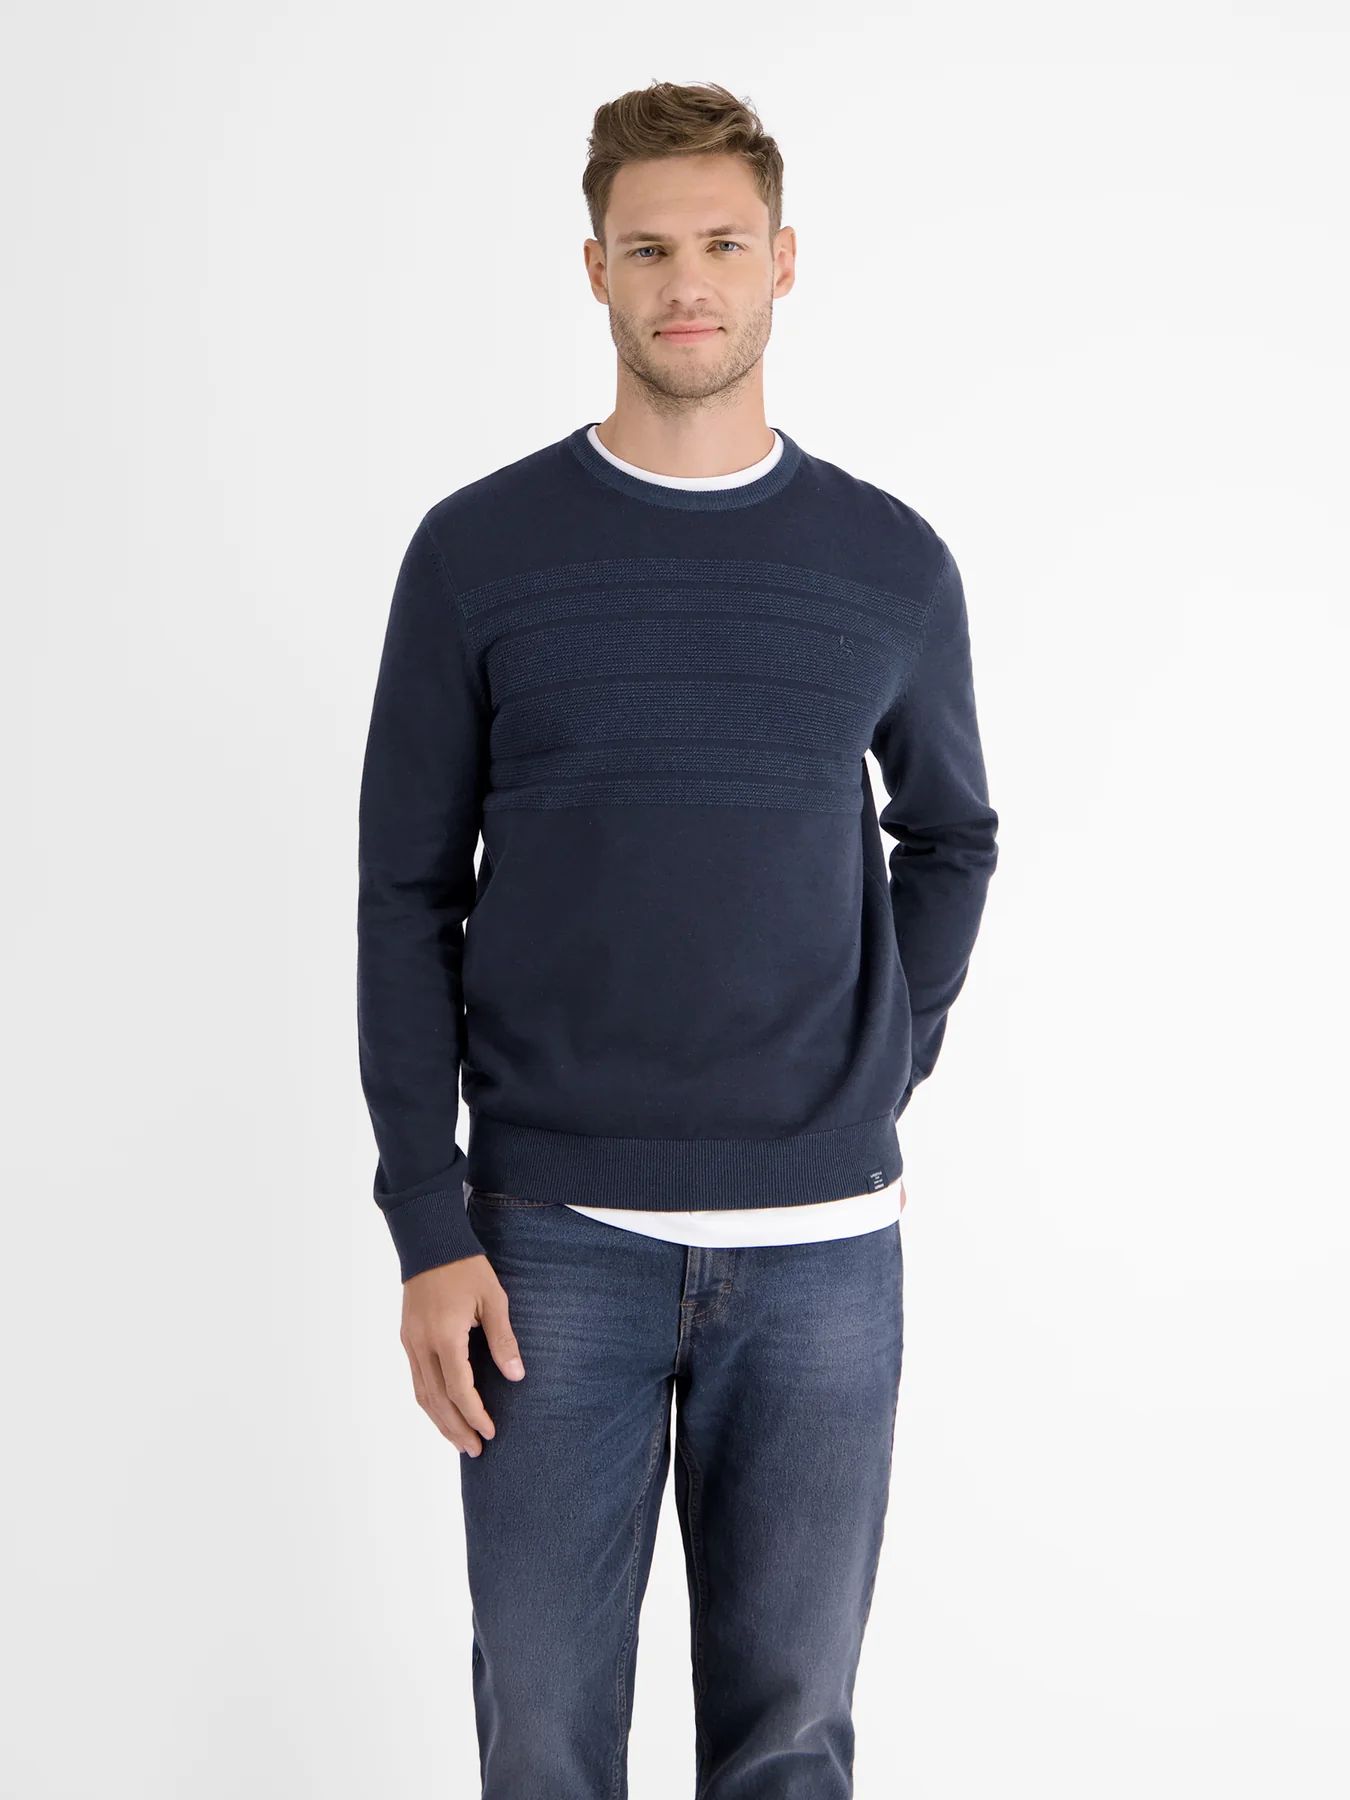 Blues | Navy - with Stripes Blue - Cotton Sweater / LERROS Classic